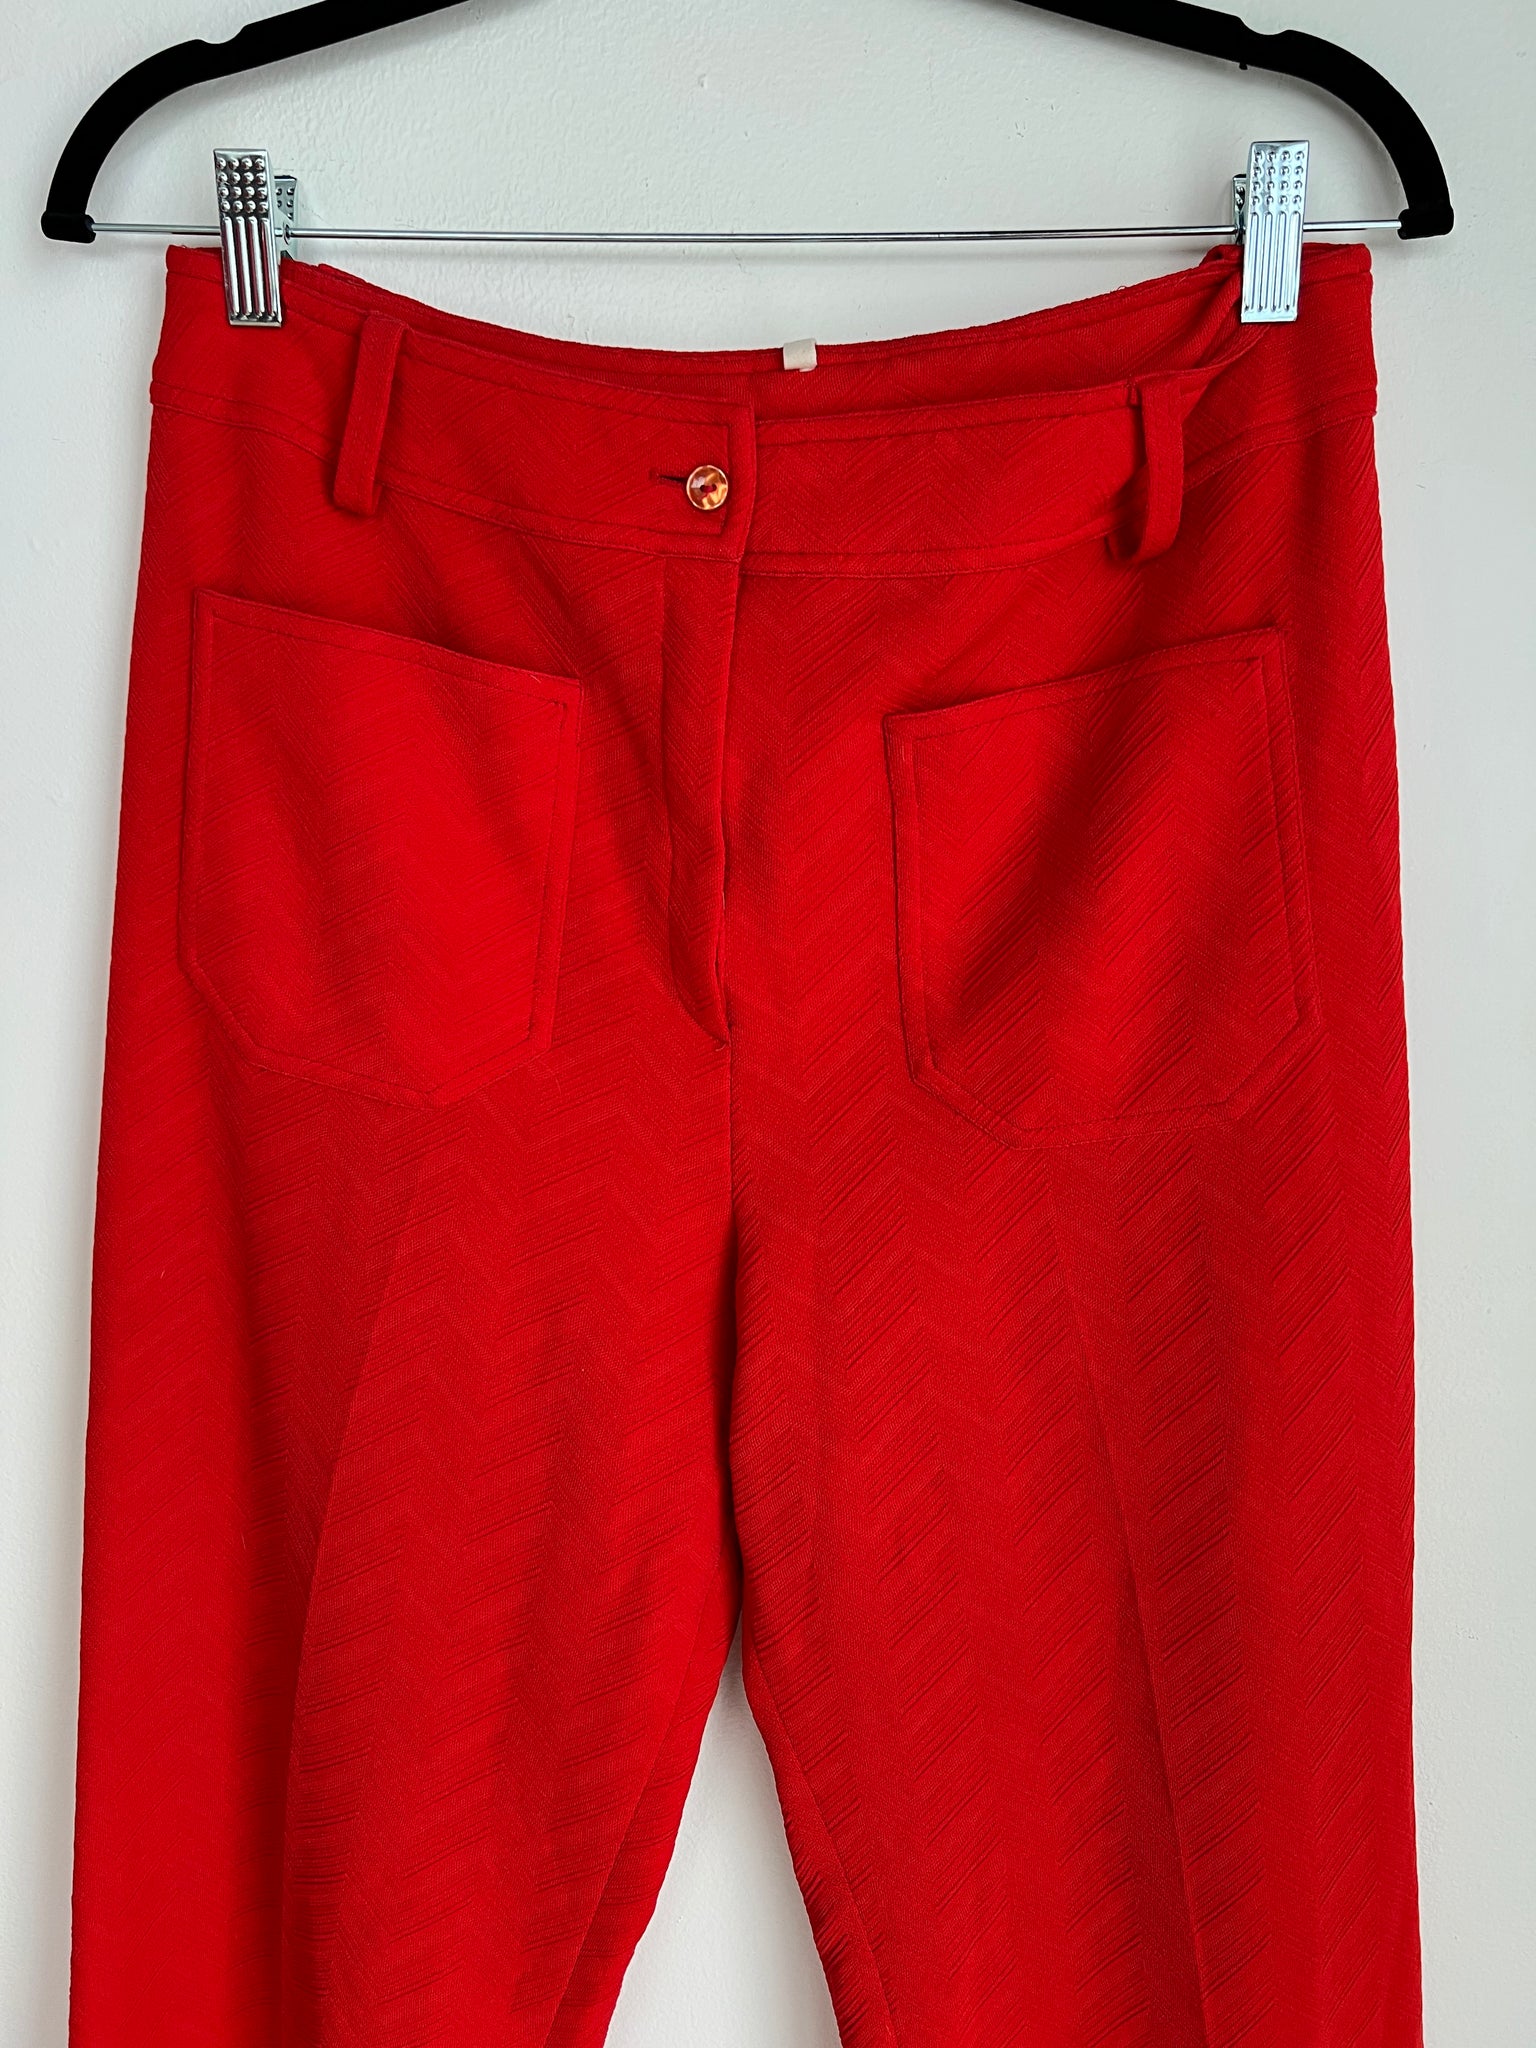 1970s PANTS- tomato red poly bell bottoms